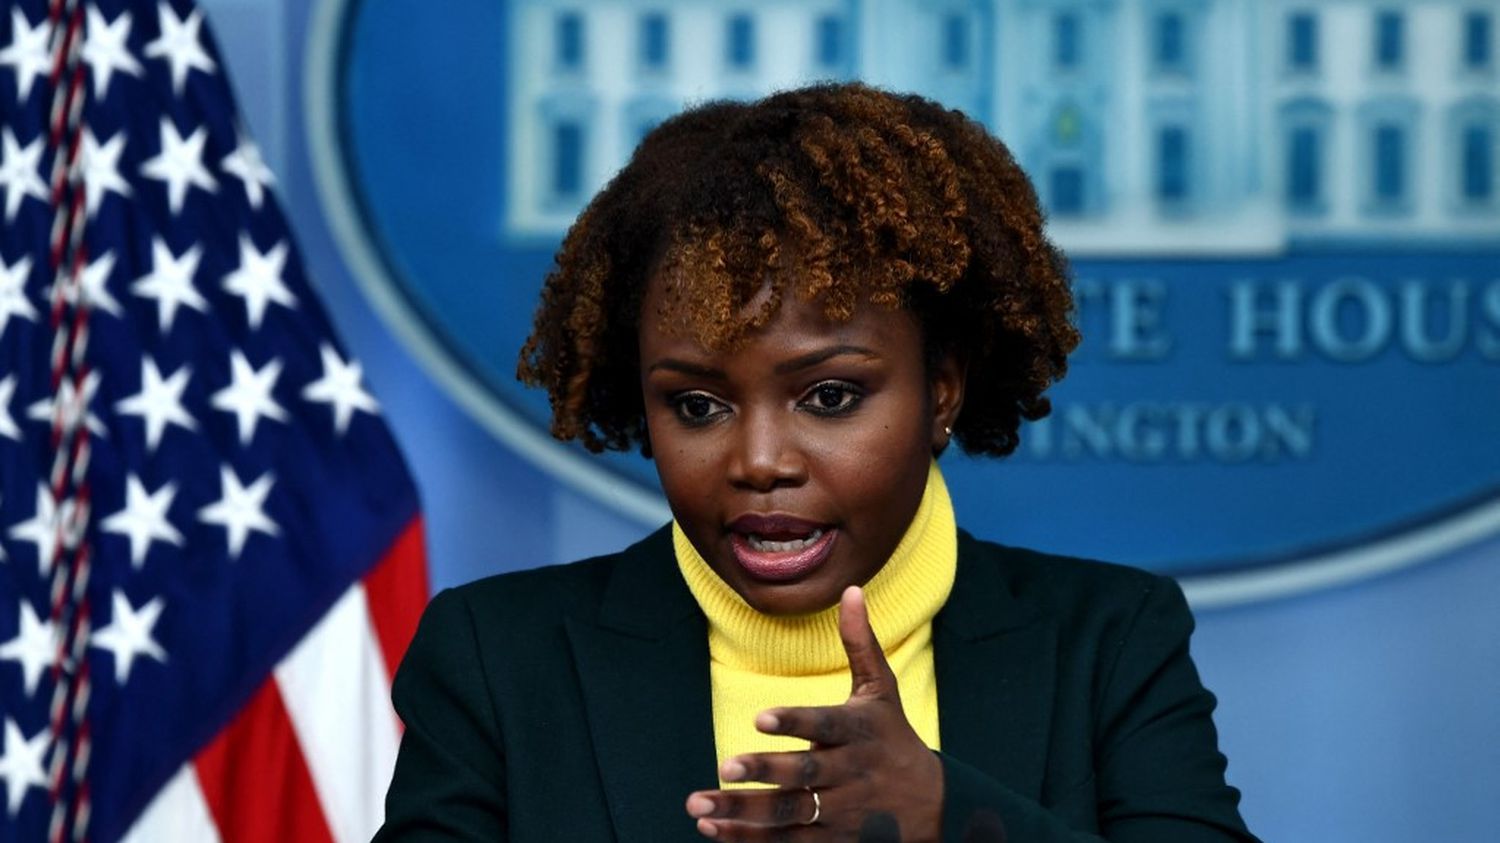 United States: Joe Biden chooses Karine Jean-Pierre as spokesperson, first black woman and first lesbian in this position
